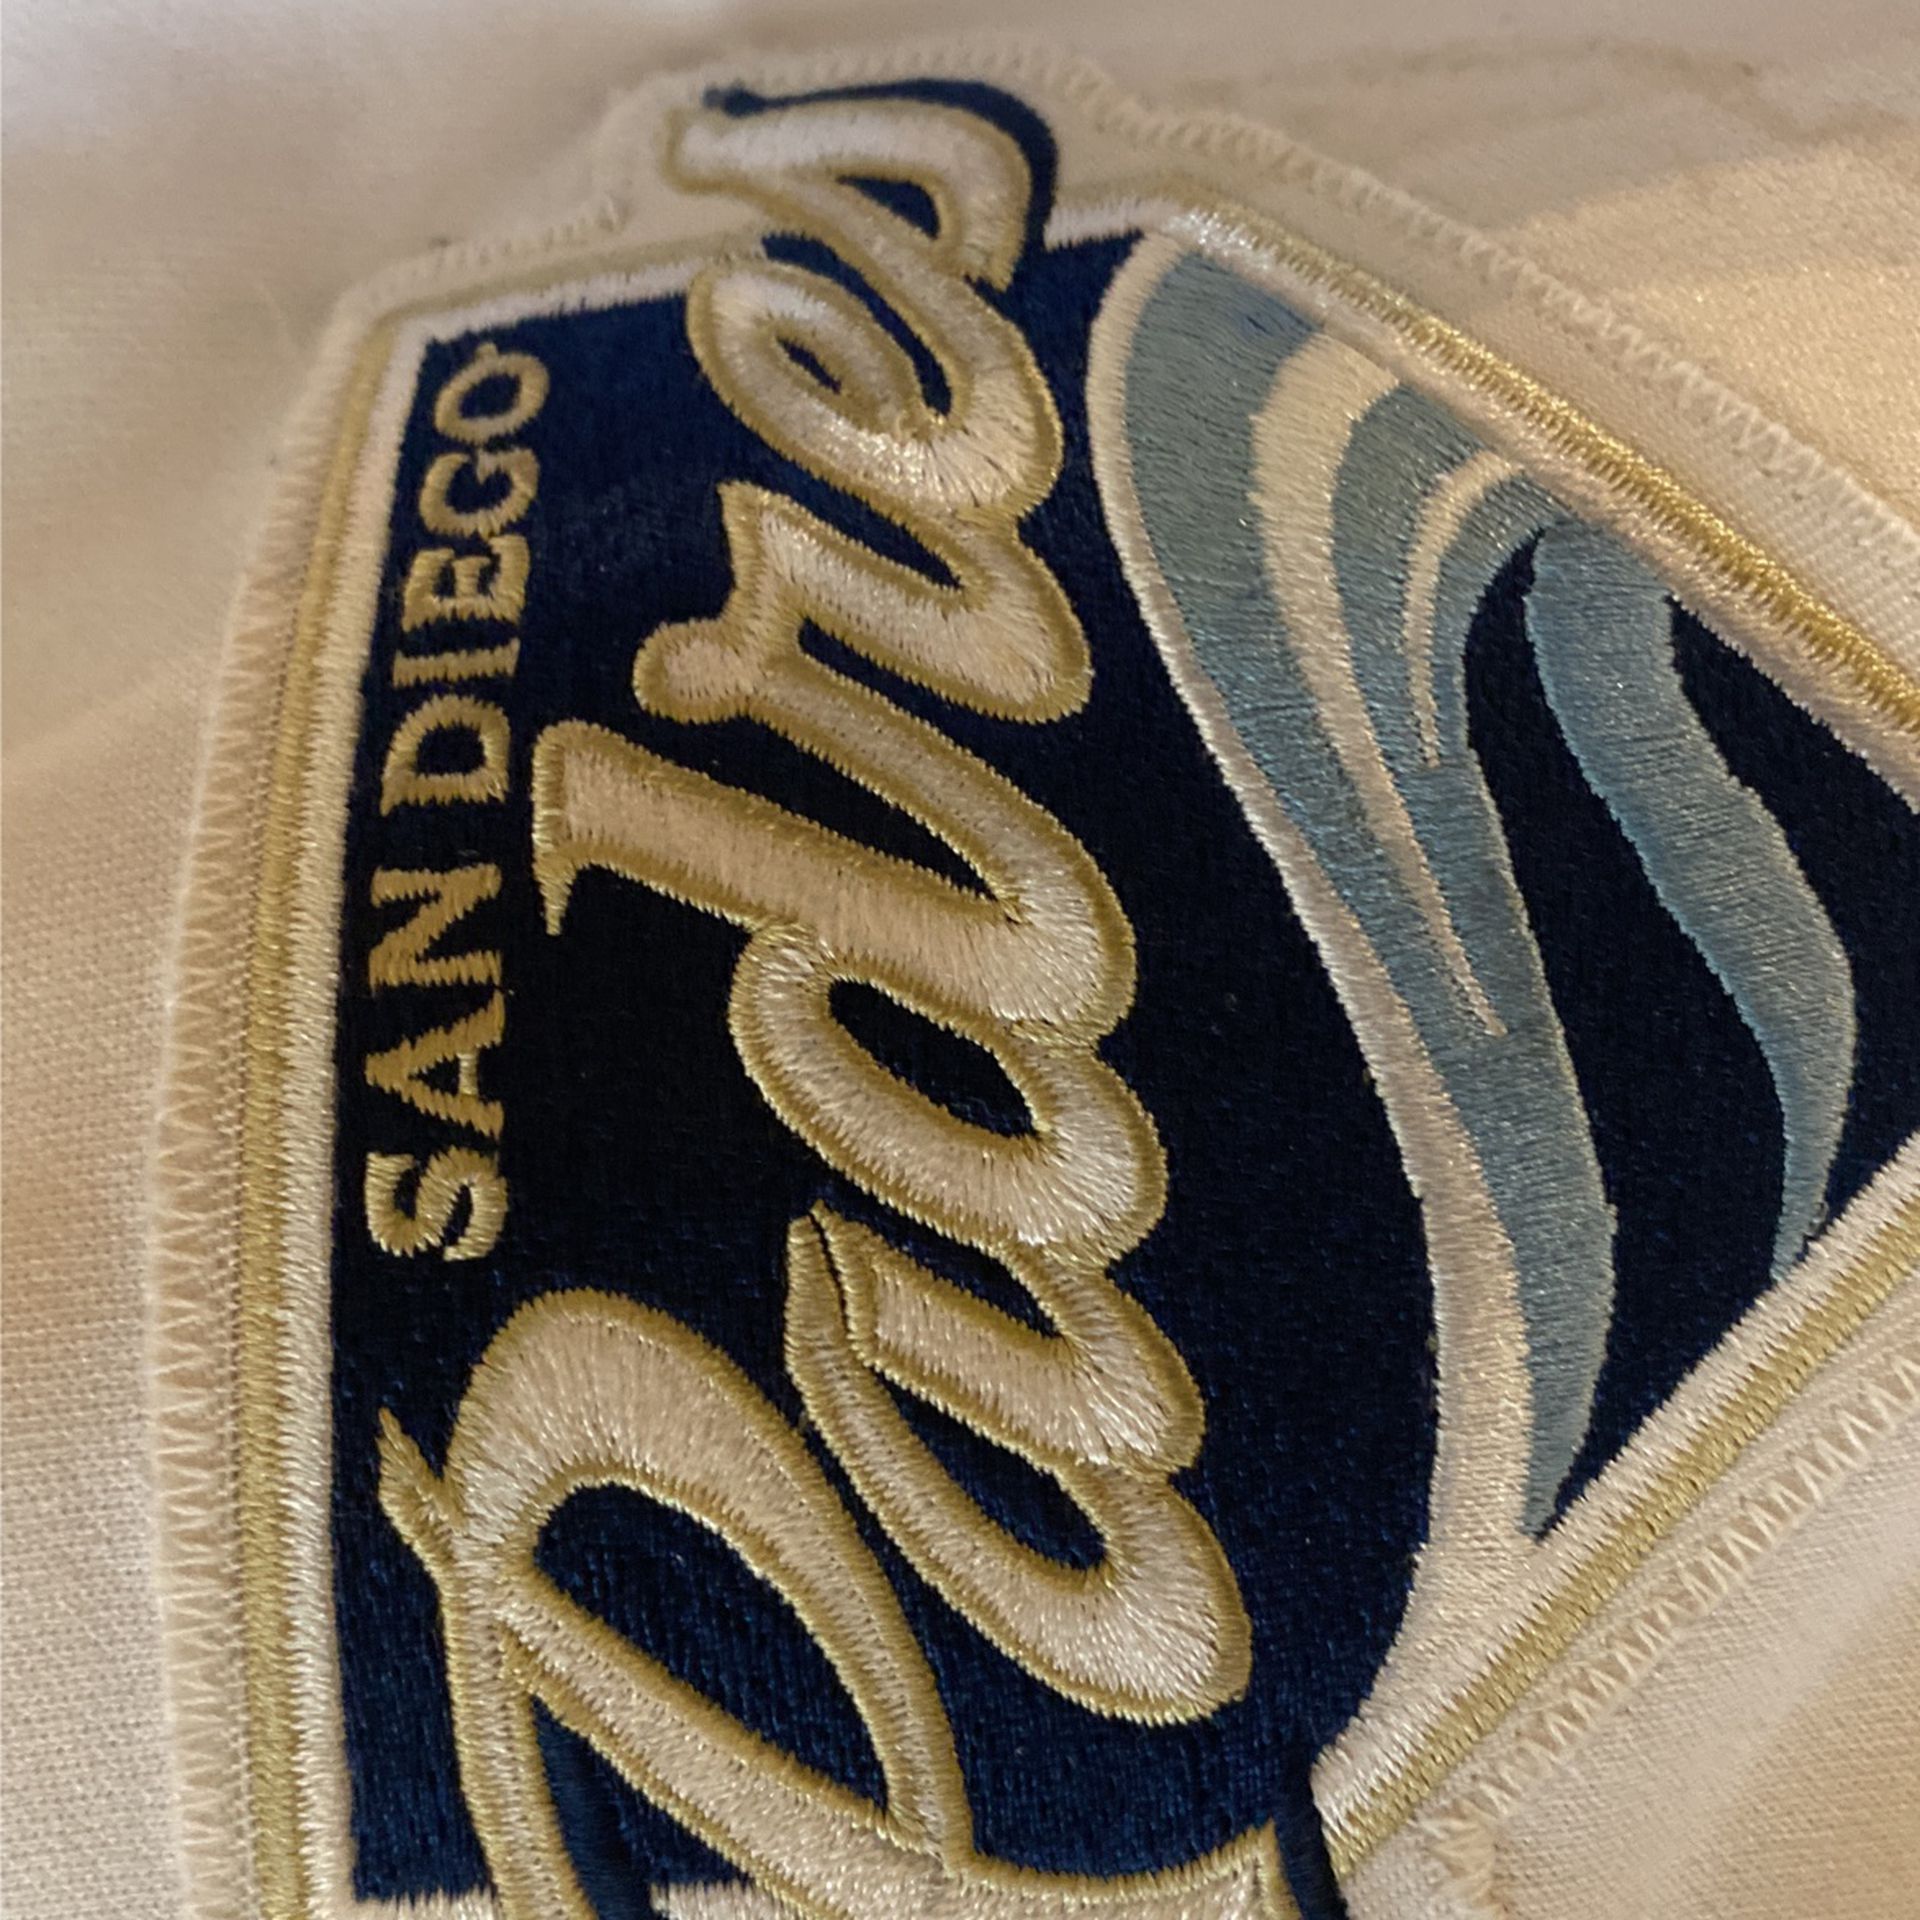 STITCHED SAN DIEGO PADRES BASEBALL JERSEY for Sale in Oceanside, CA -  OfferUp